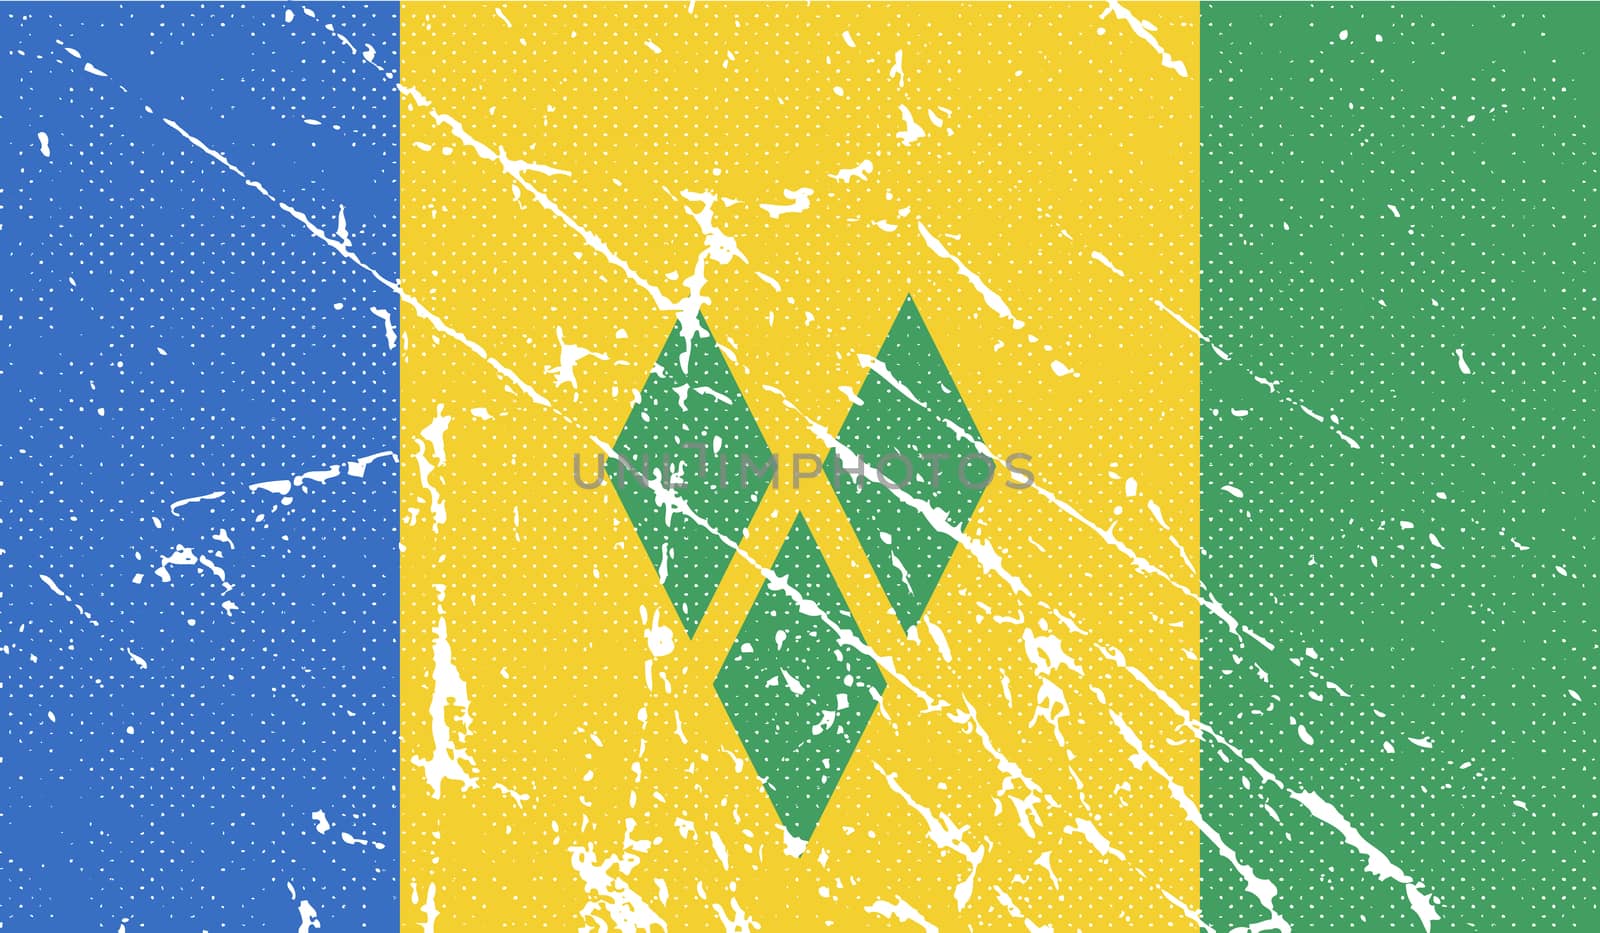 Flag of Saint Vincent and The Grenadines with old texture.  illustration